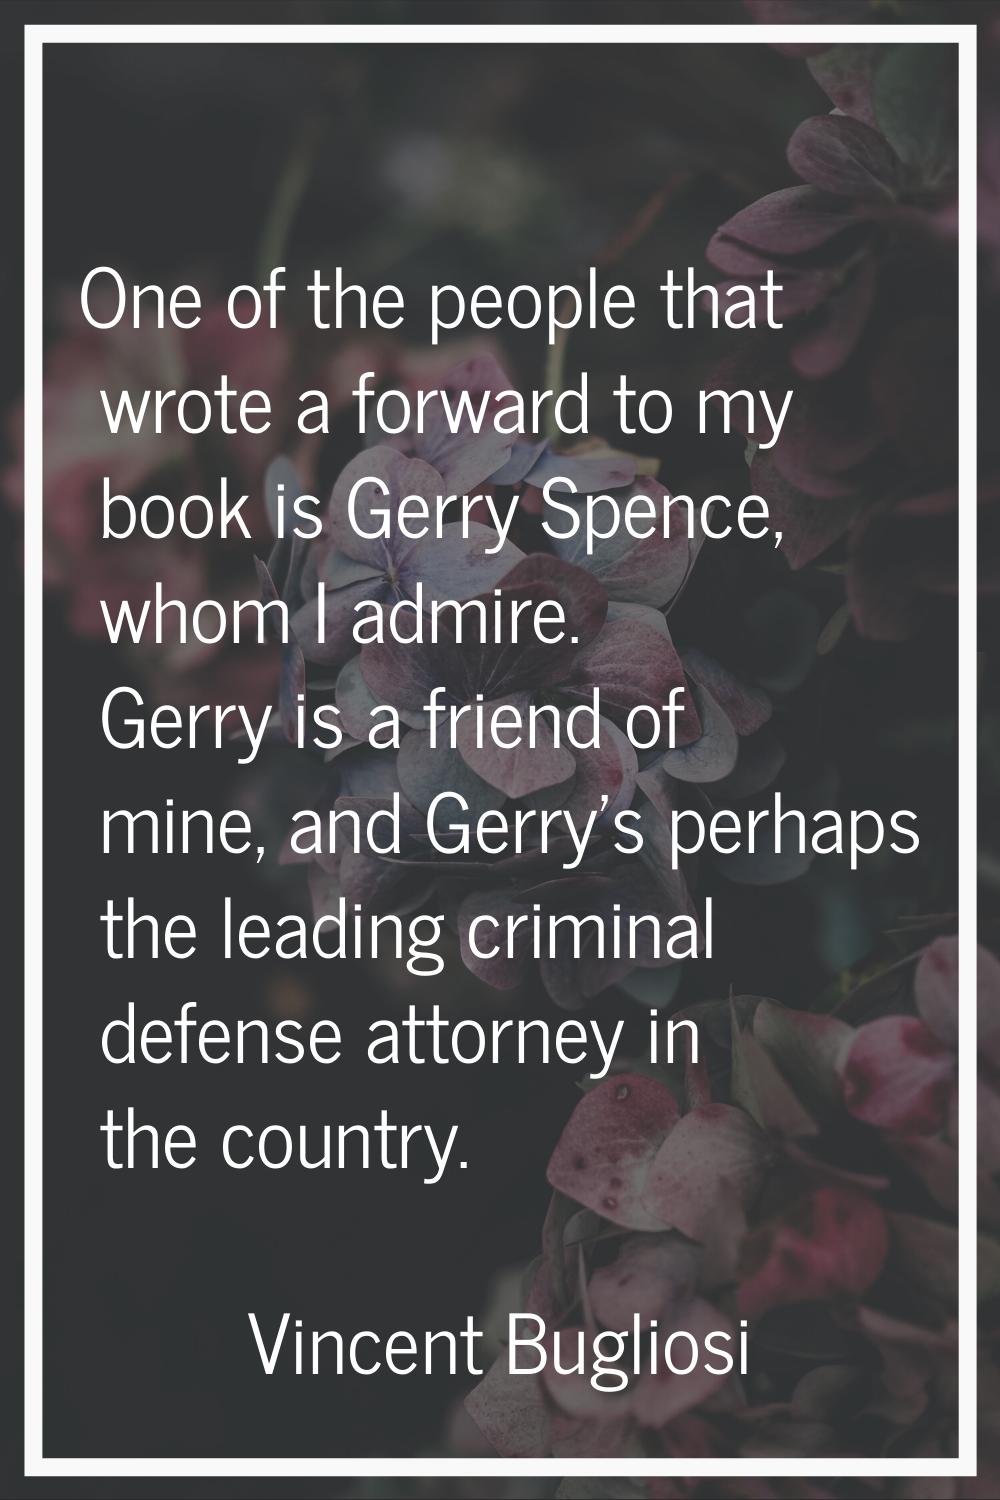 One of the people that wrote a forward to my book is Gerry Spence, whom I admire. Gerry is a friend